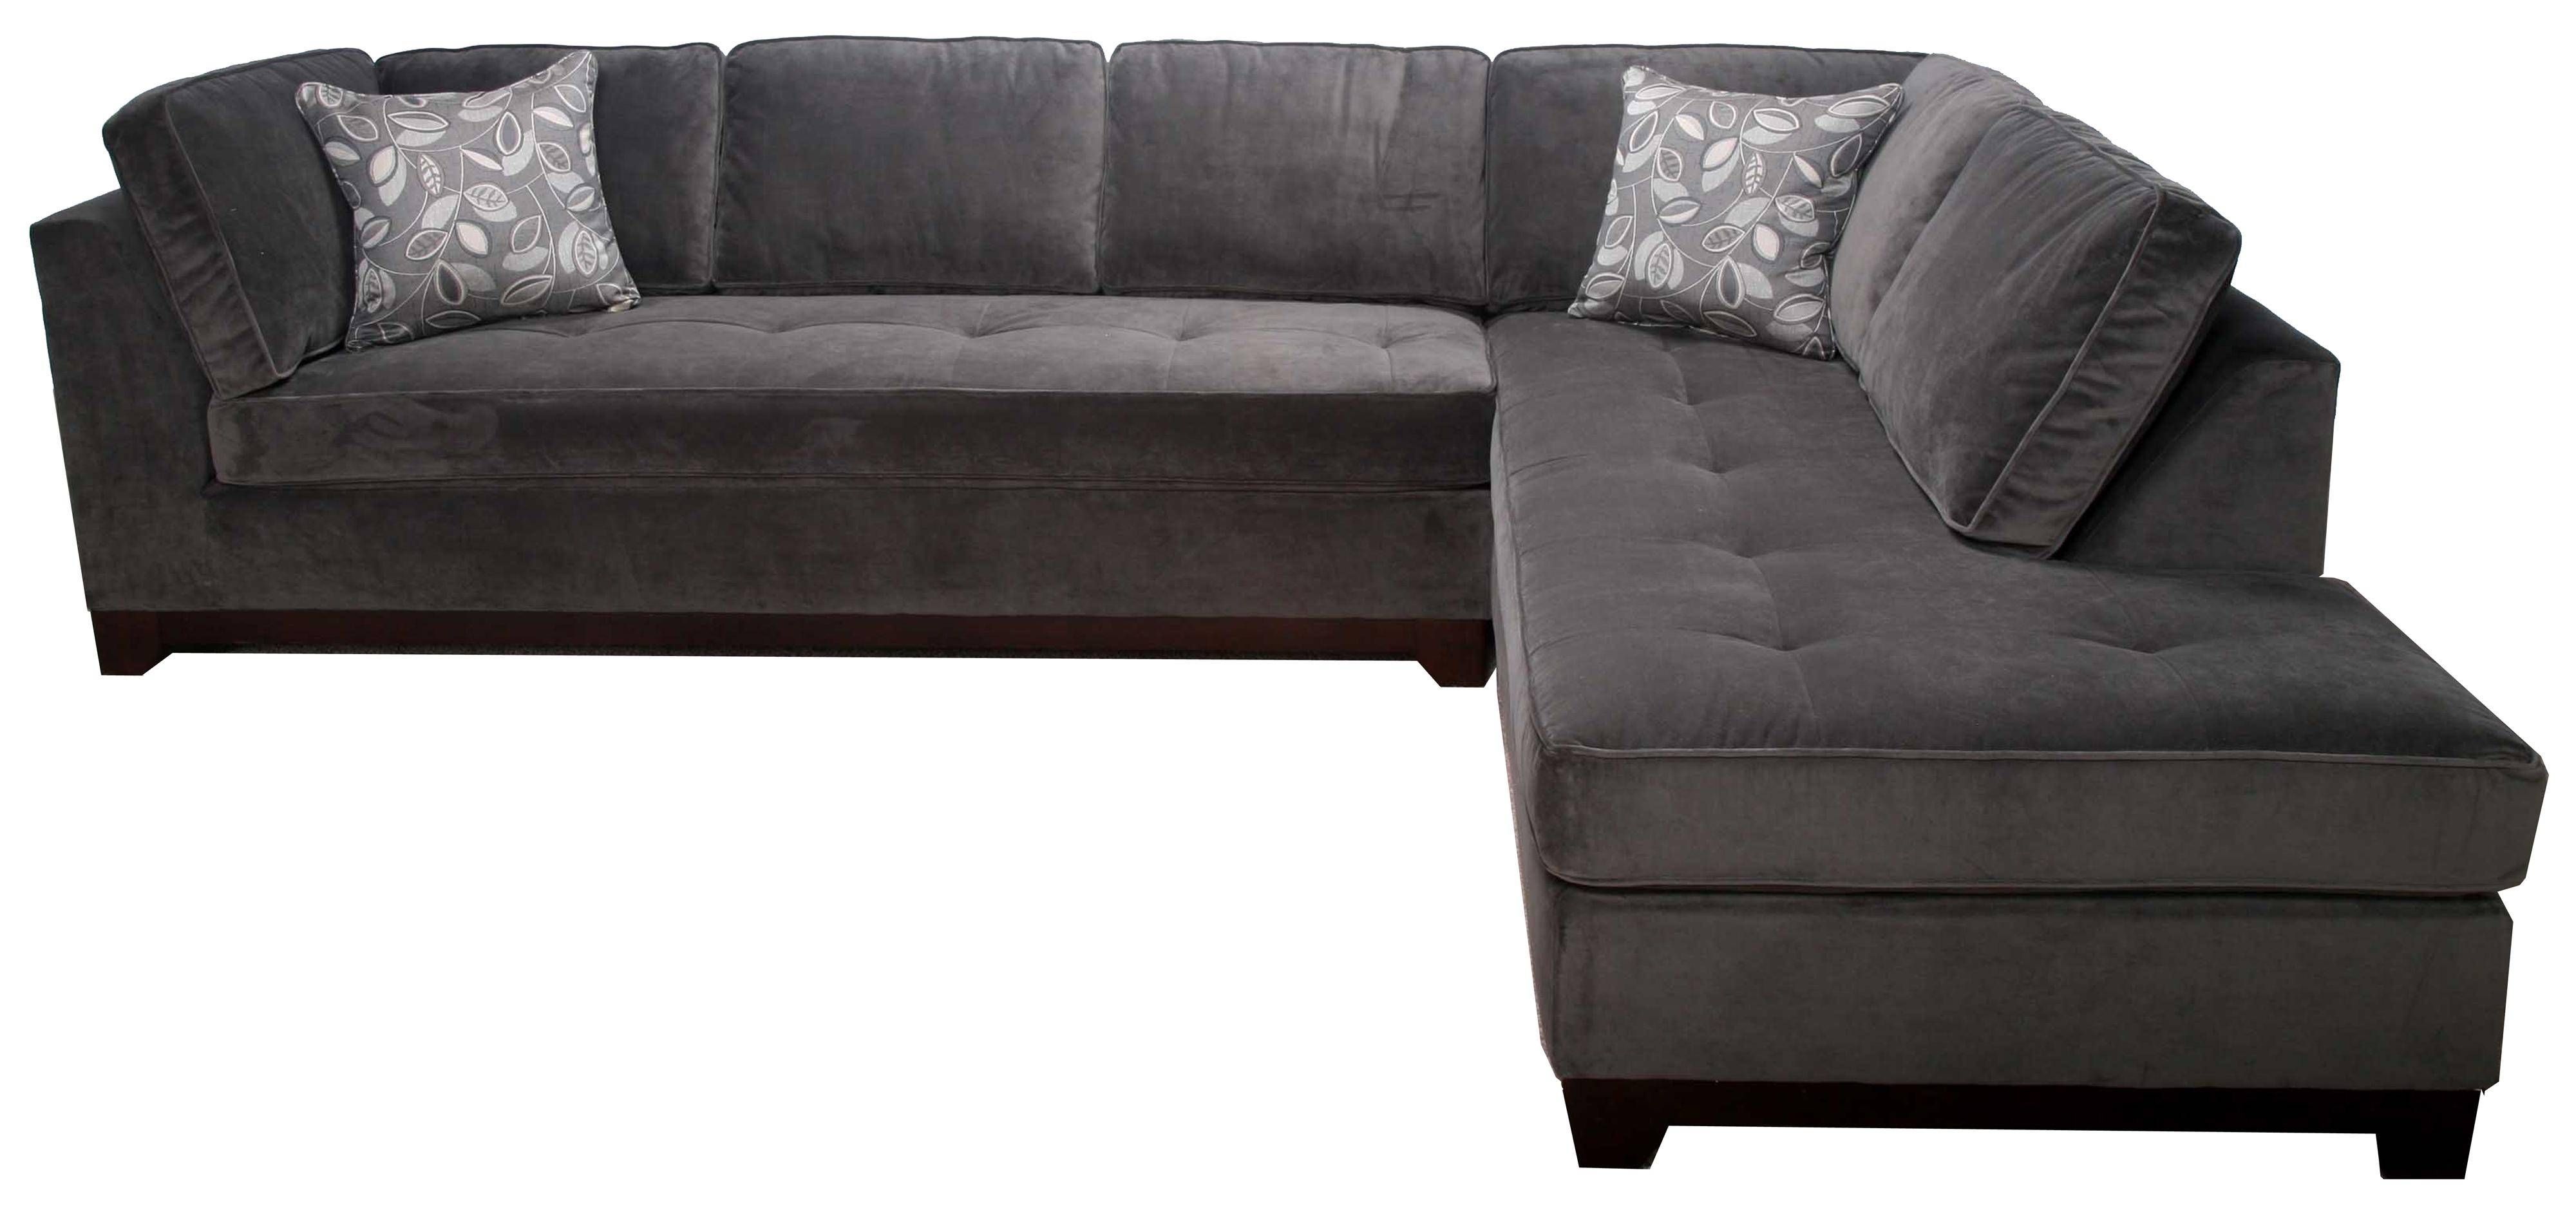 Bauhaus 536a Contemporary 2 Piece Sectional With Chaise – Ahfa Pertaining To Bauhaus Sectional Sofas (View 3 of 30)